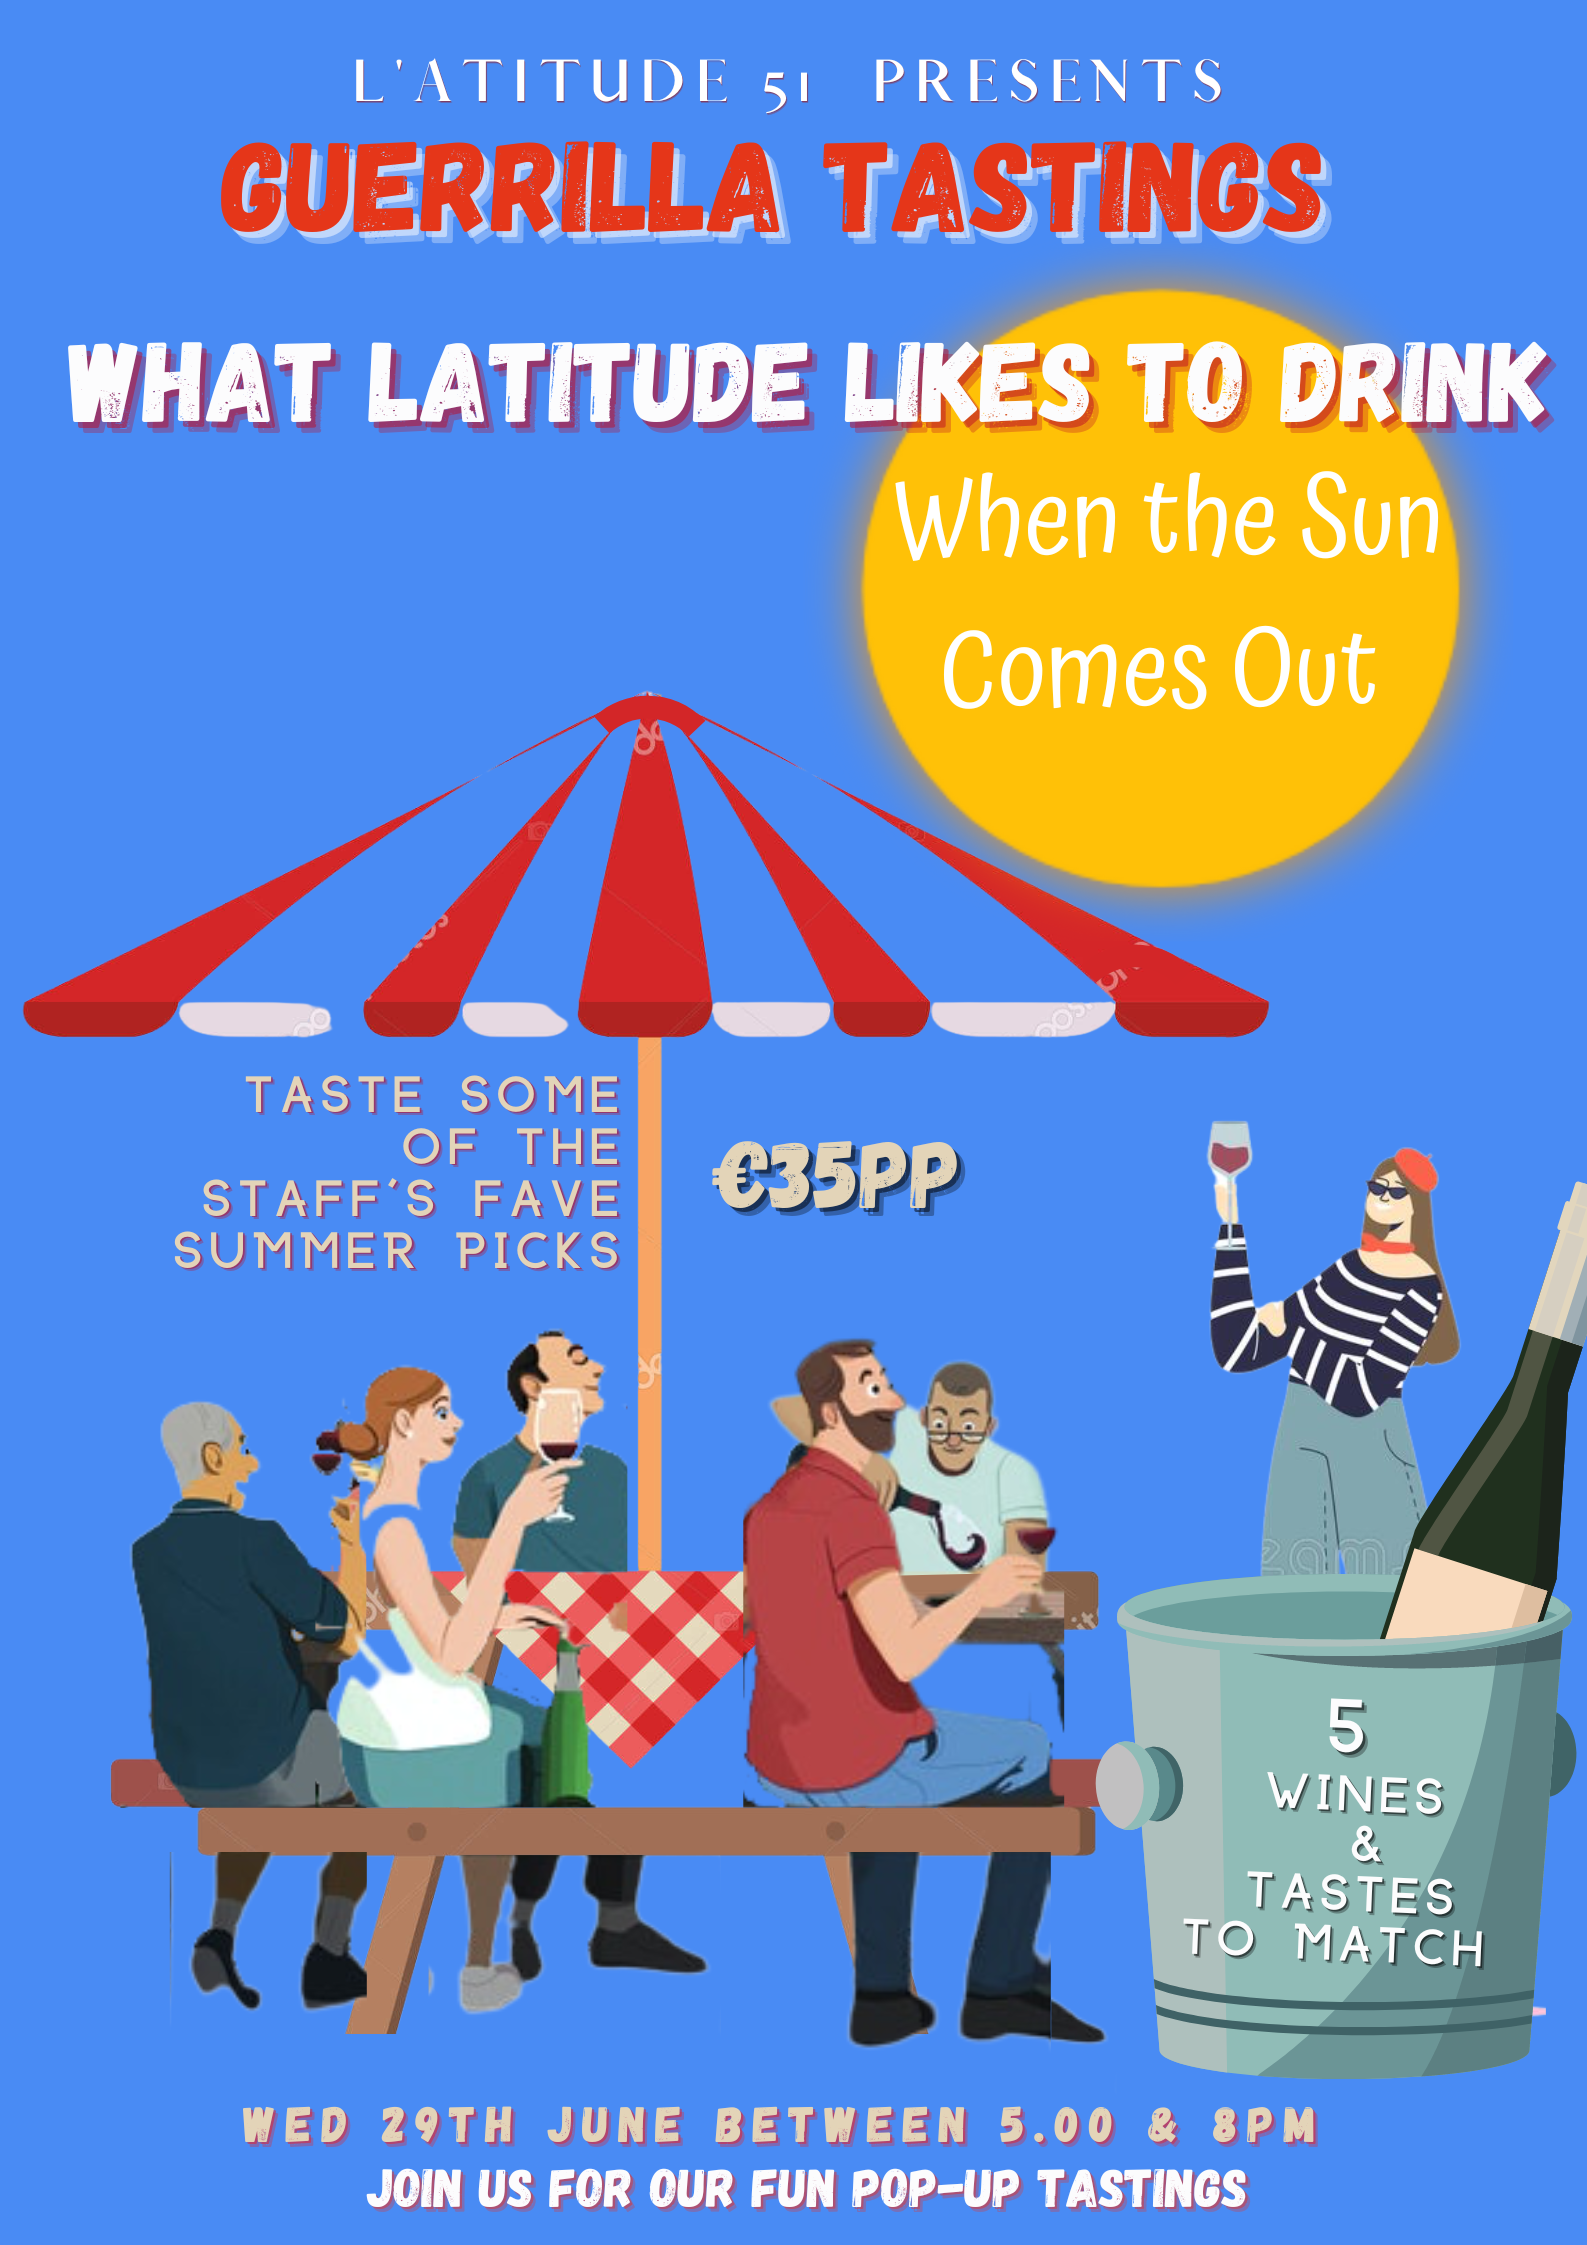 What Latitude Likes to Drink